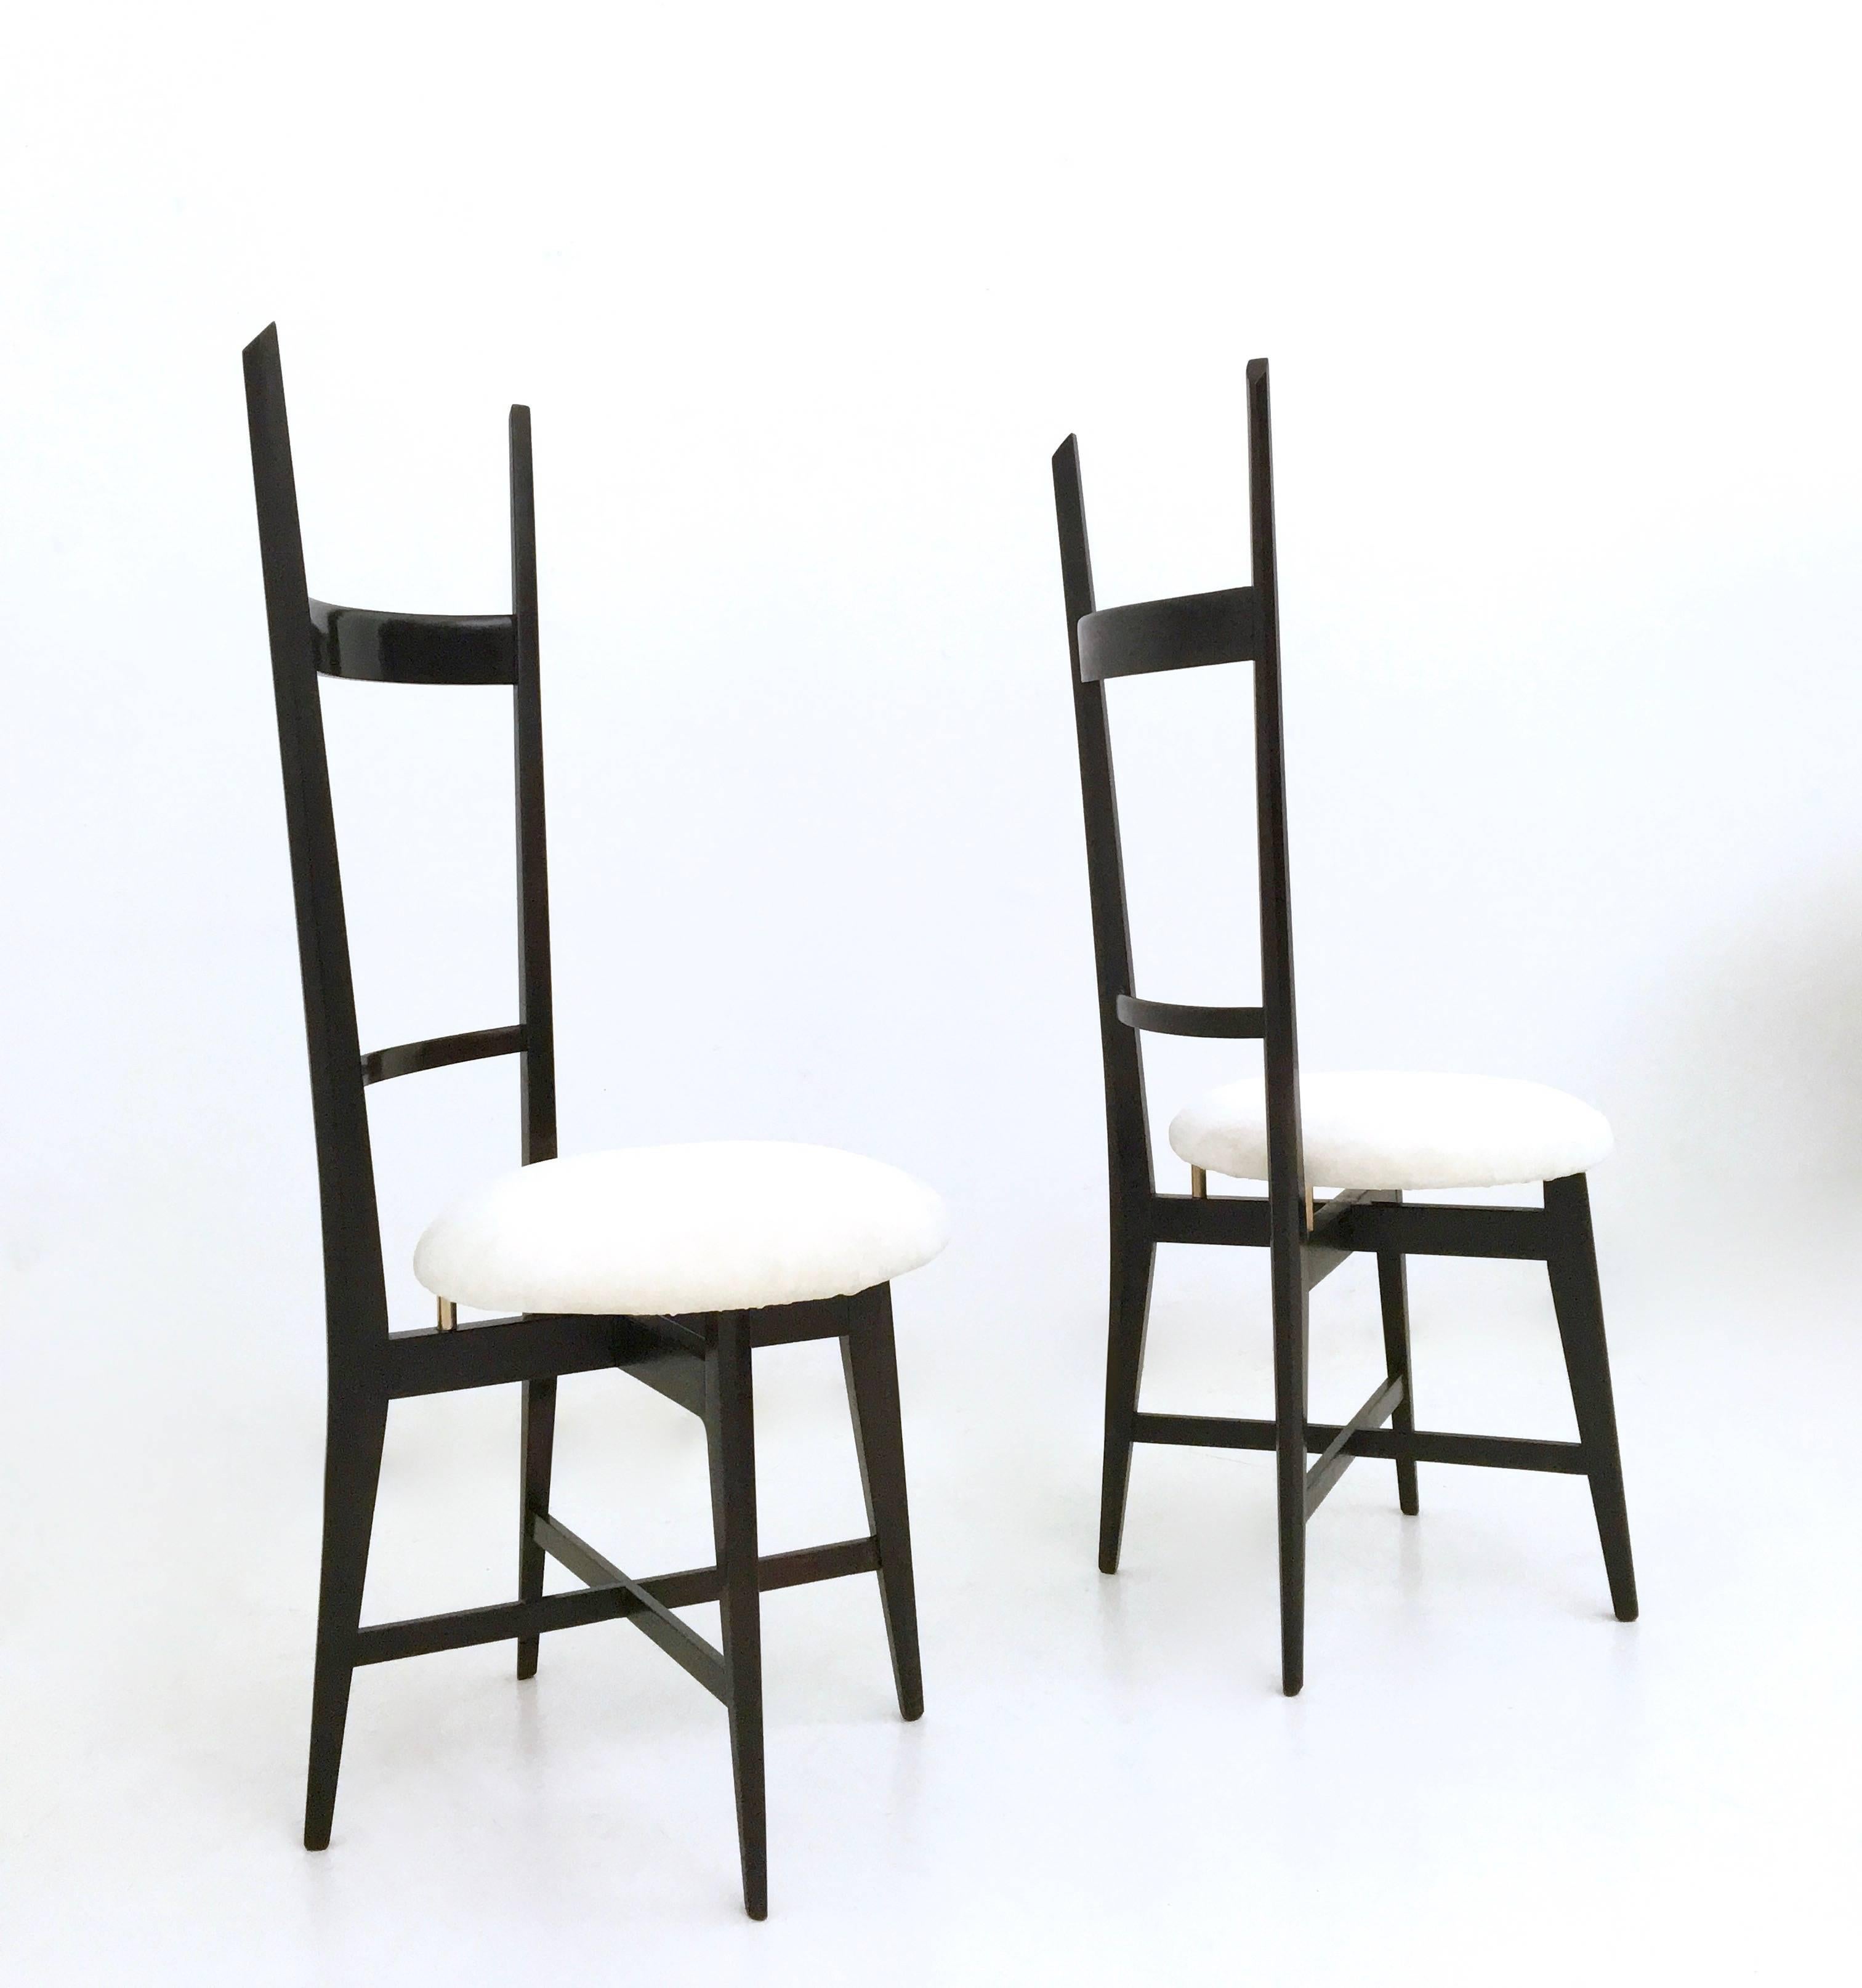 Made in Italy, 1950s.
These chairs feature a solid ebonized beech frame, brass details and white velvet upholstery.
They are vintage, therefore they might show slight traces of use, but since they have been restored they can be considered as in